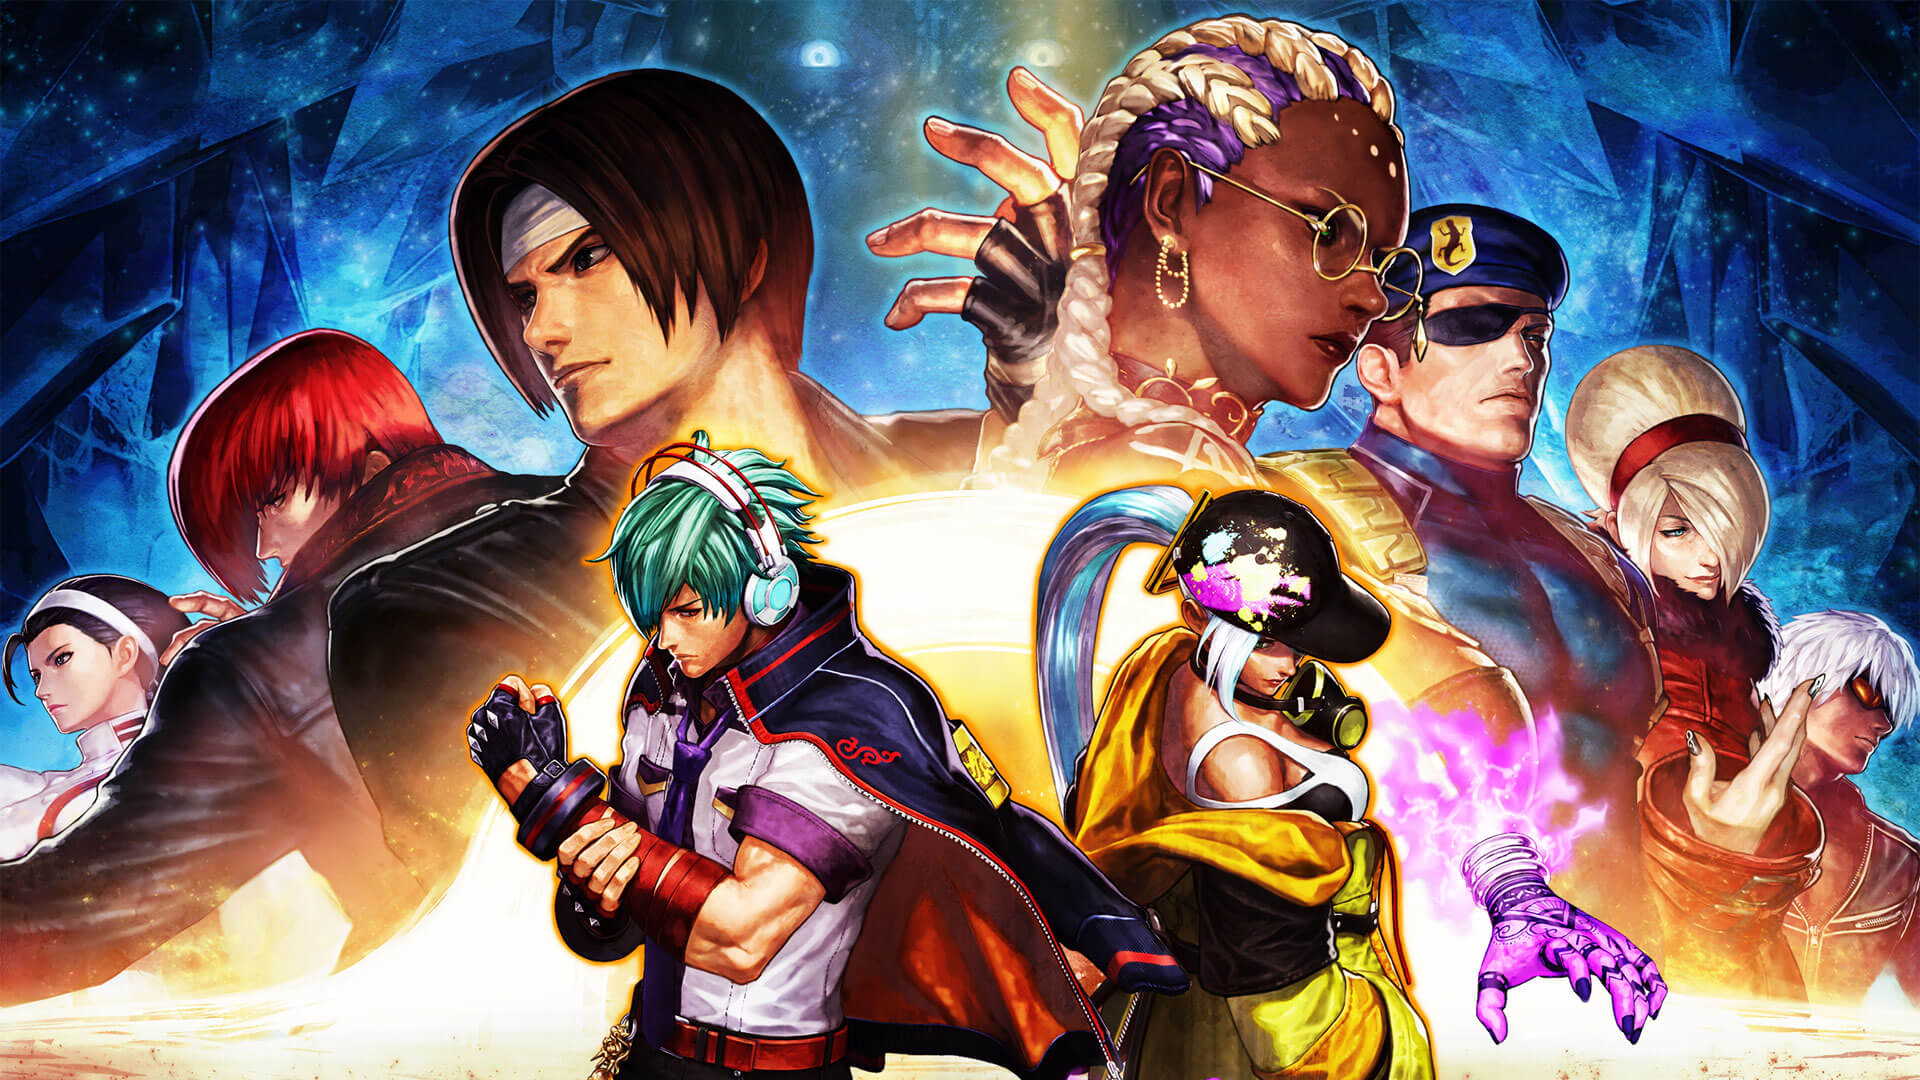 The King of Fighters XV DLC has been detailed